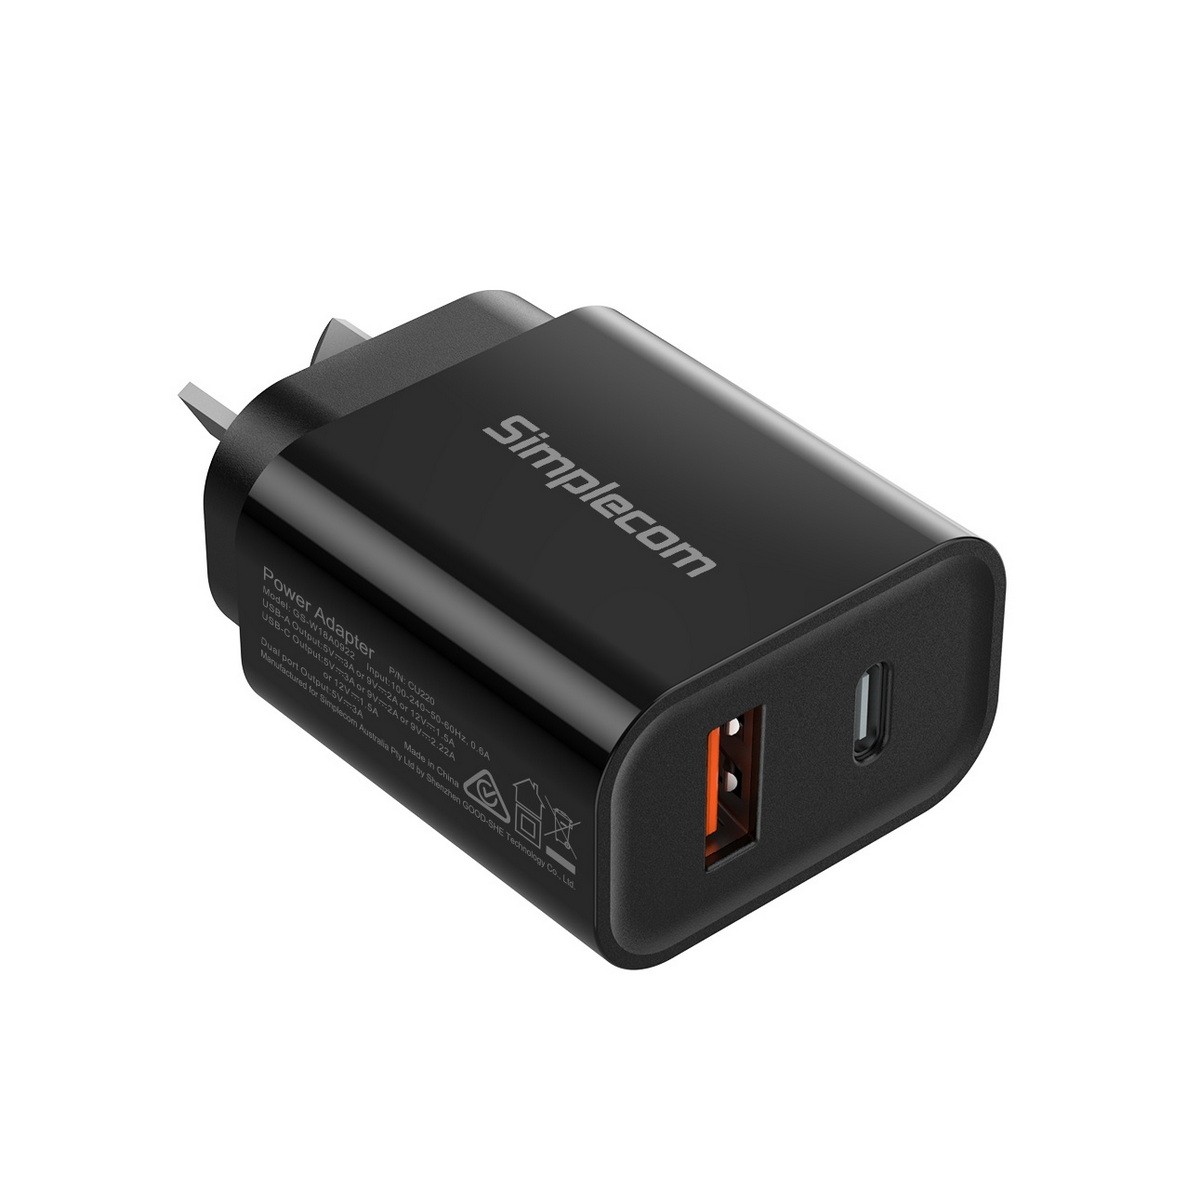  Dual Port PD 20W Fast Wall Charger USB-C Type-C + USB-A for Phone Tablet  